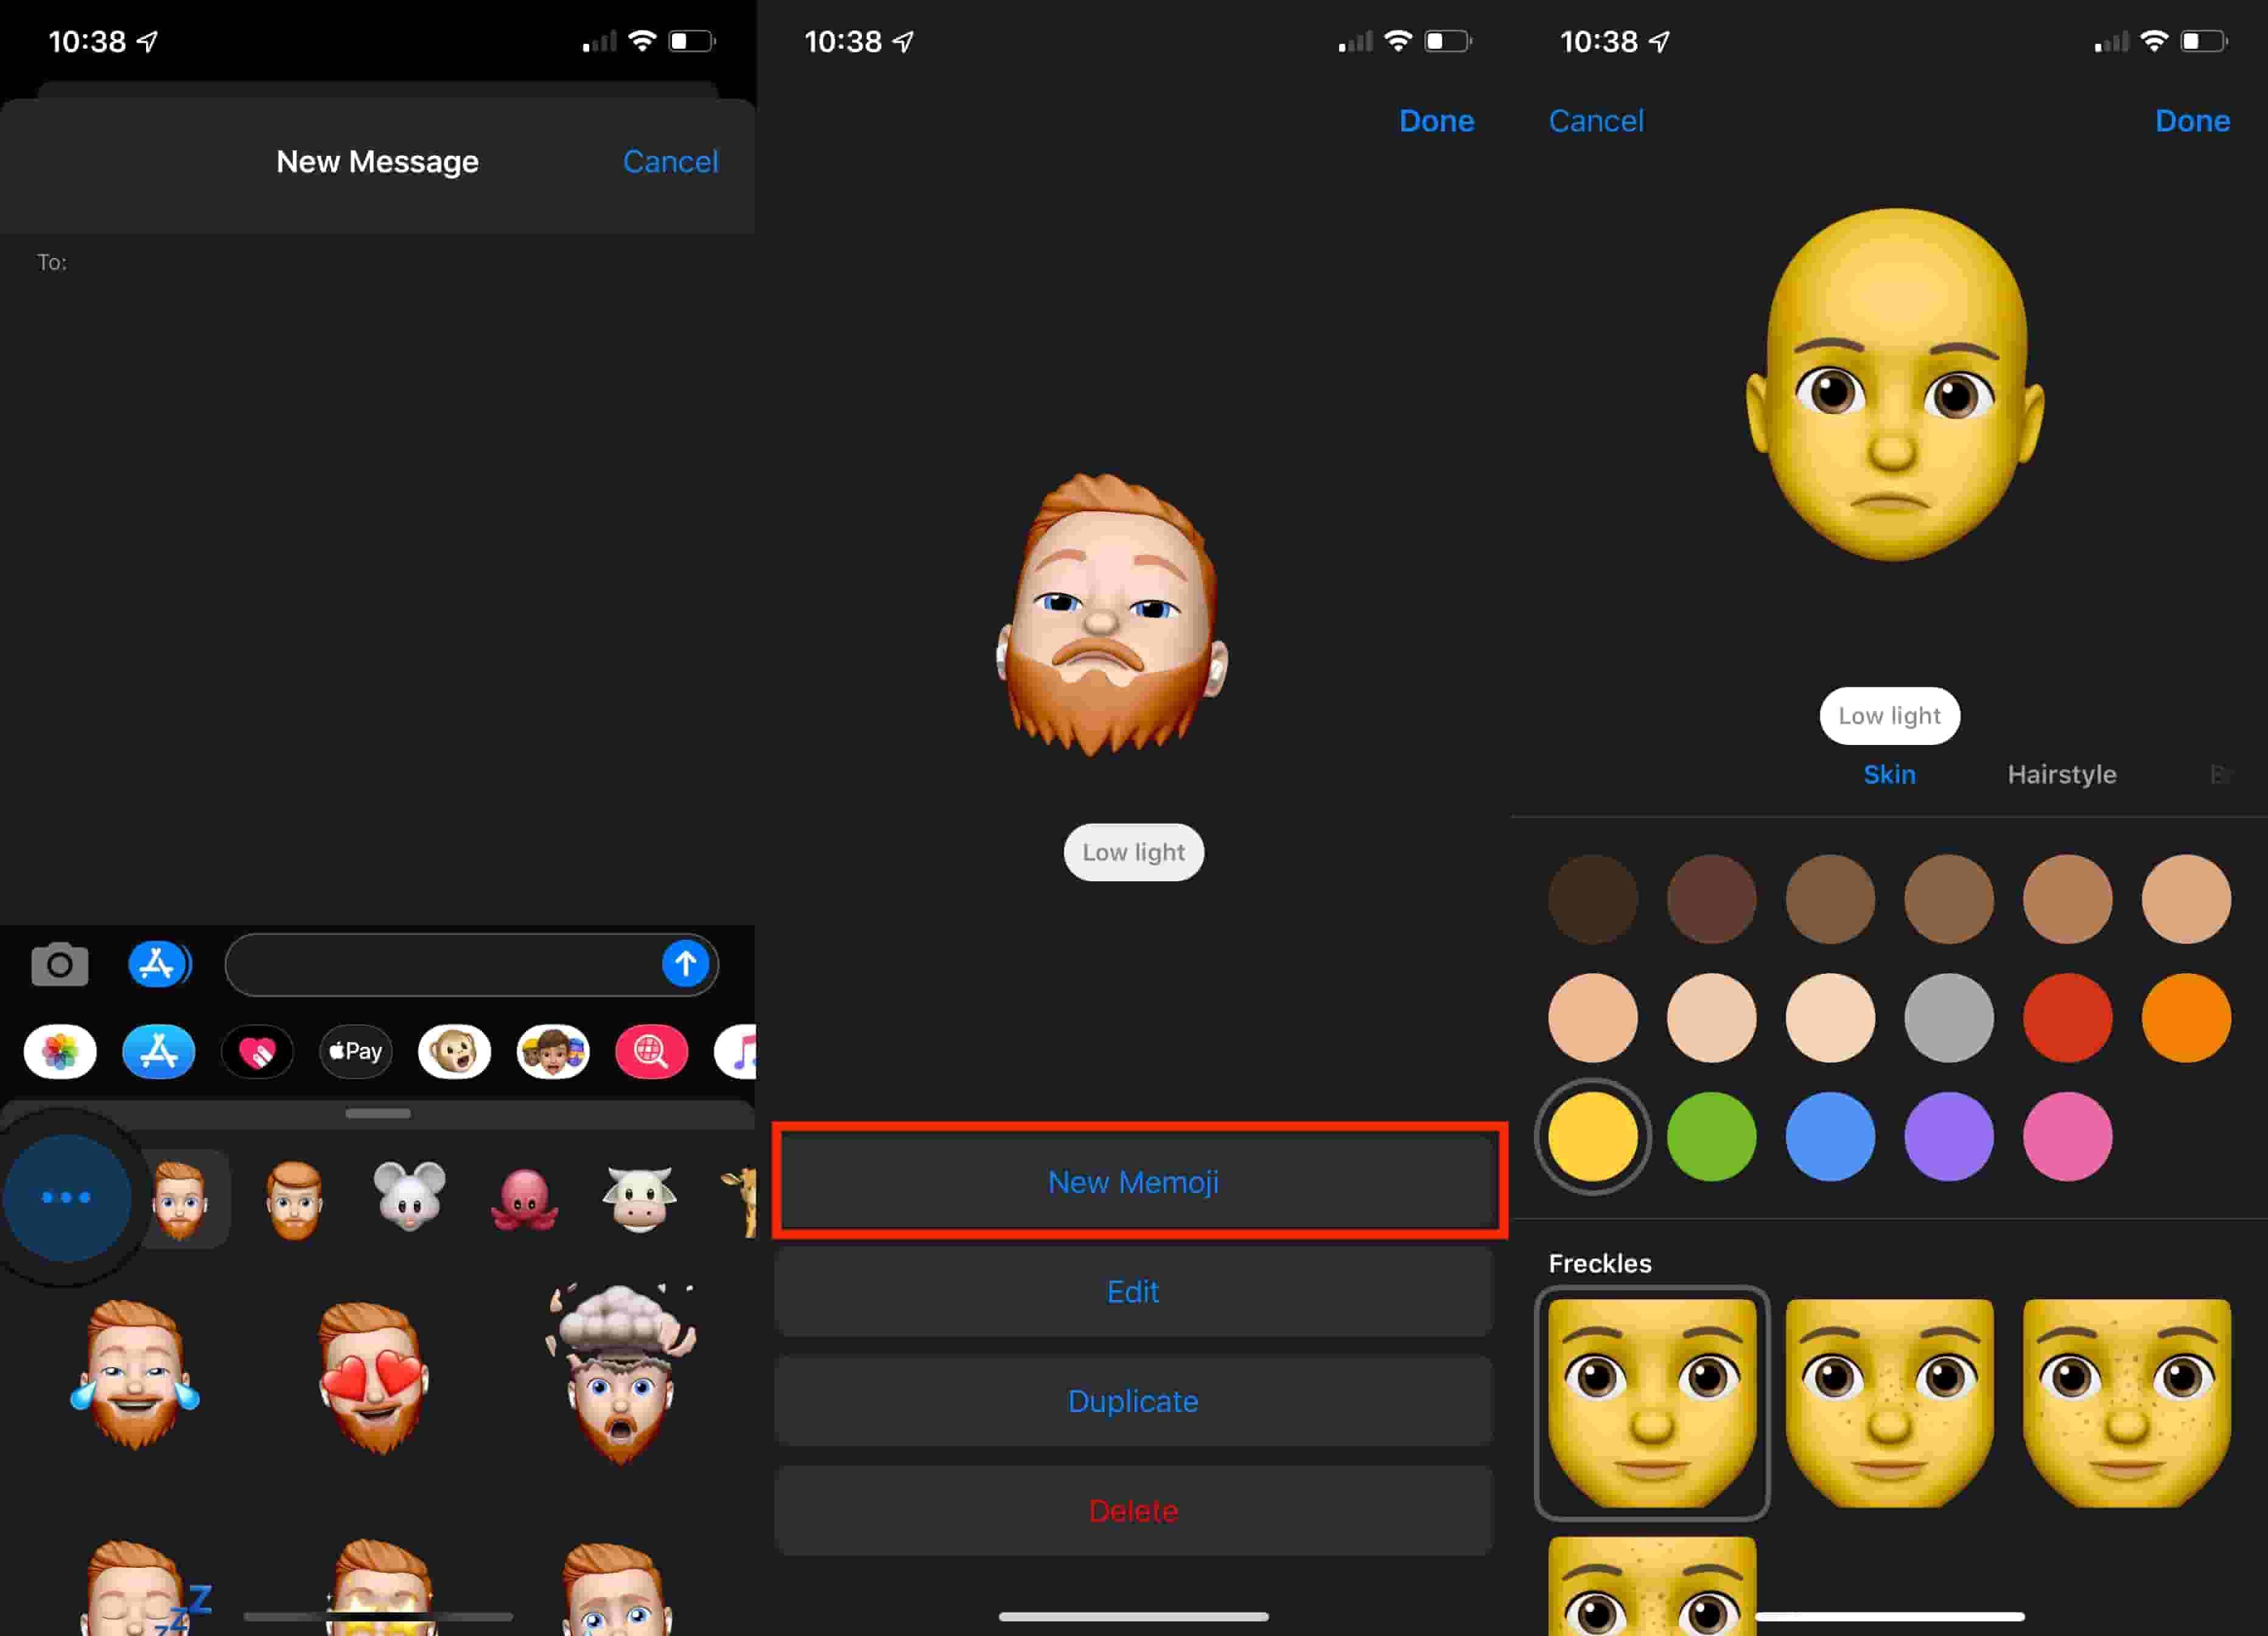 How to edit and create customized Memoji in iOS 13 and iPadOS - AppleToolBox